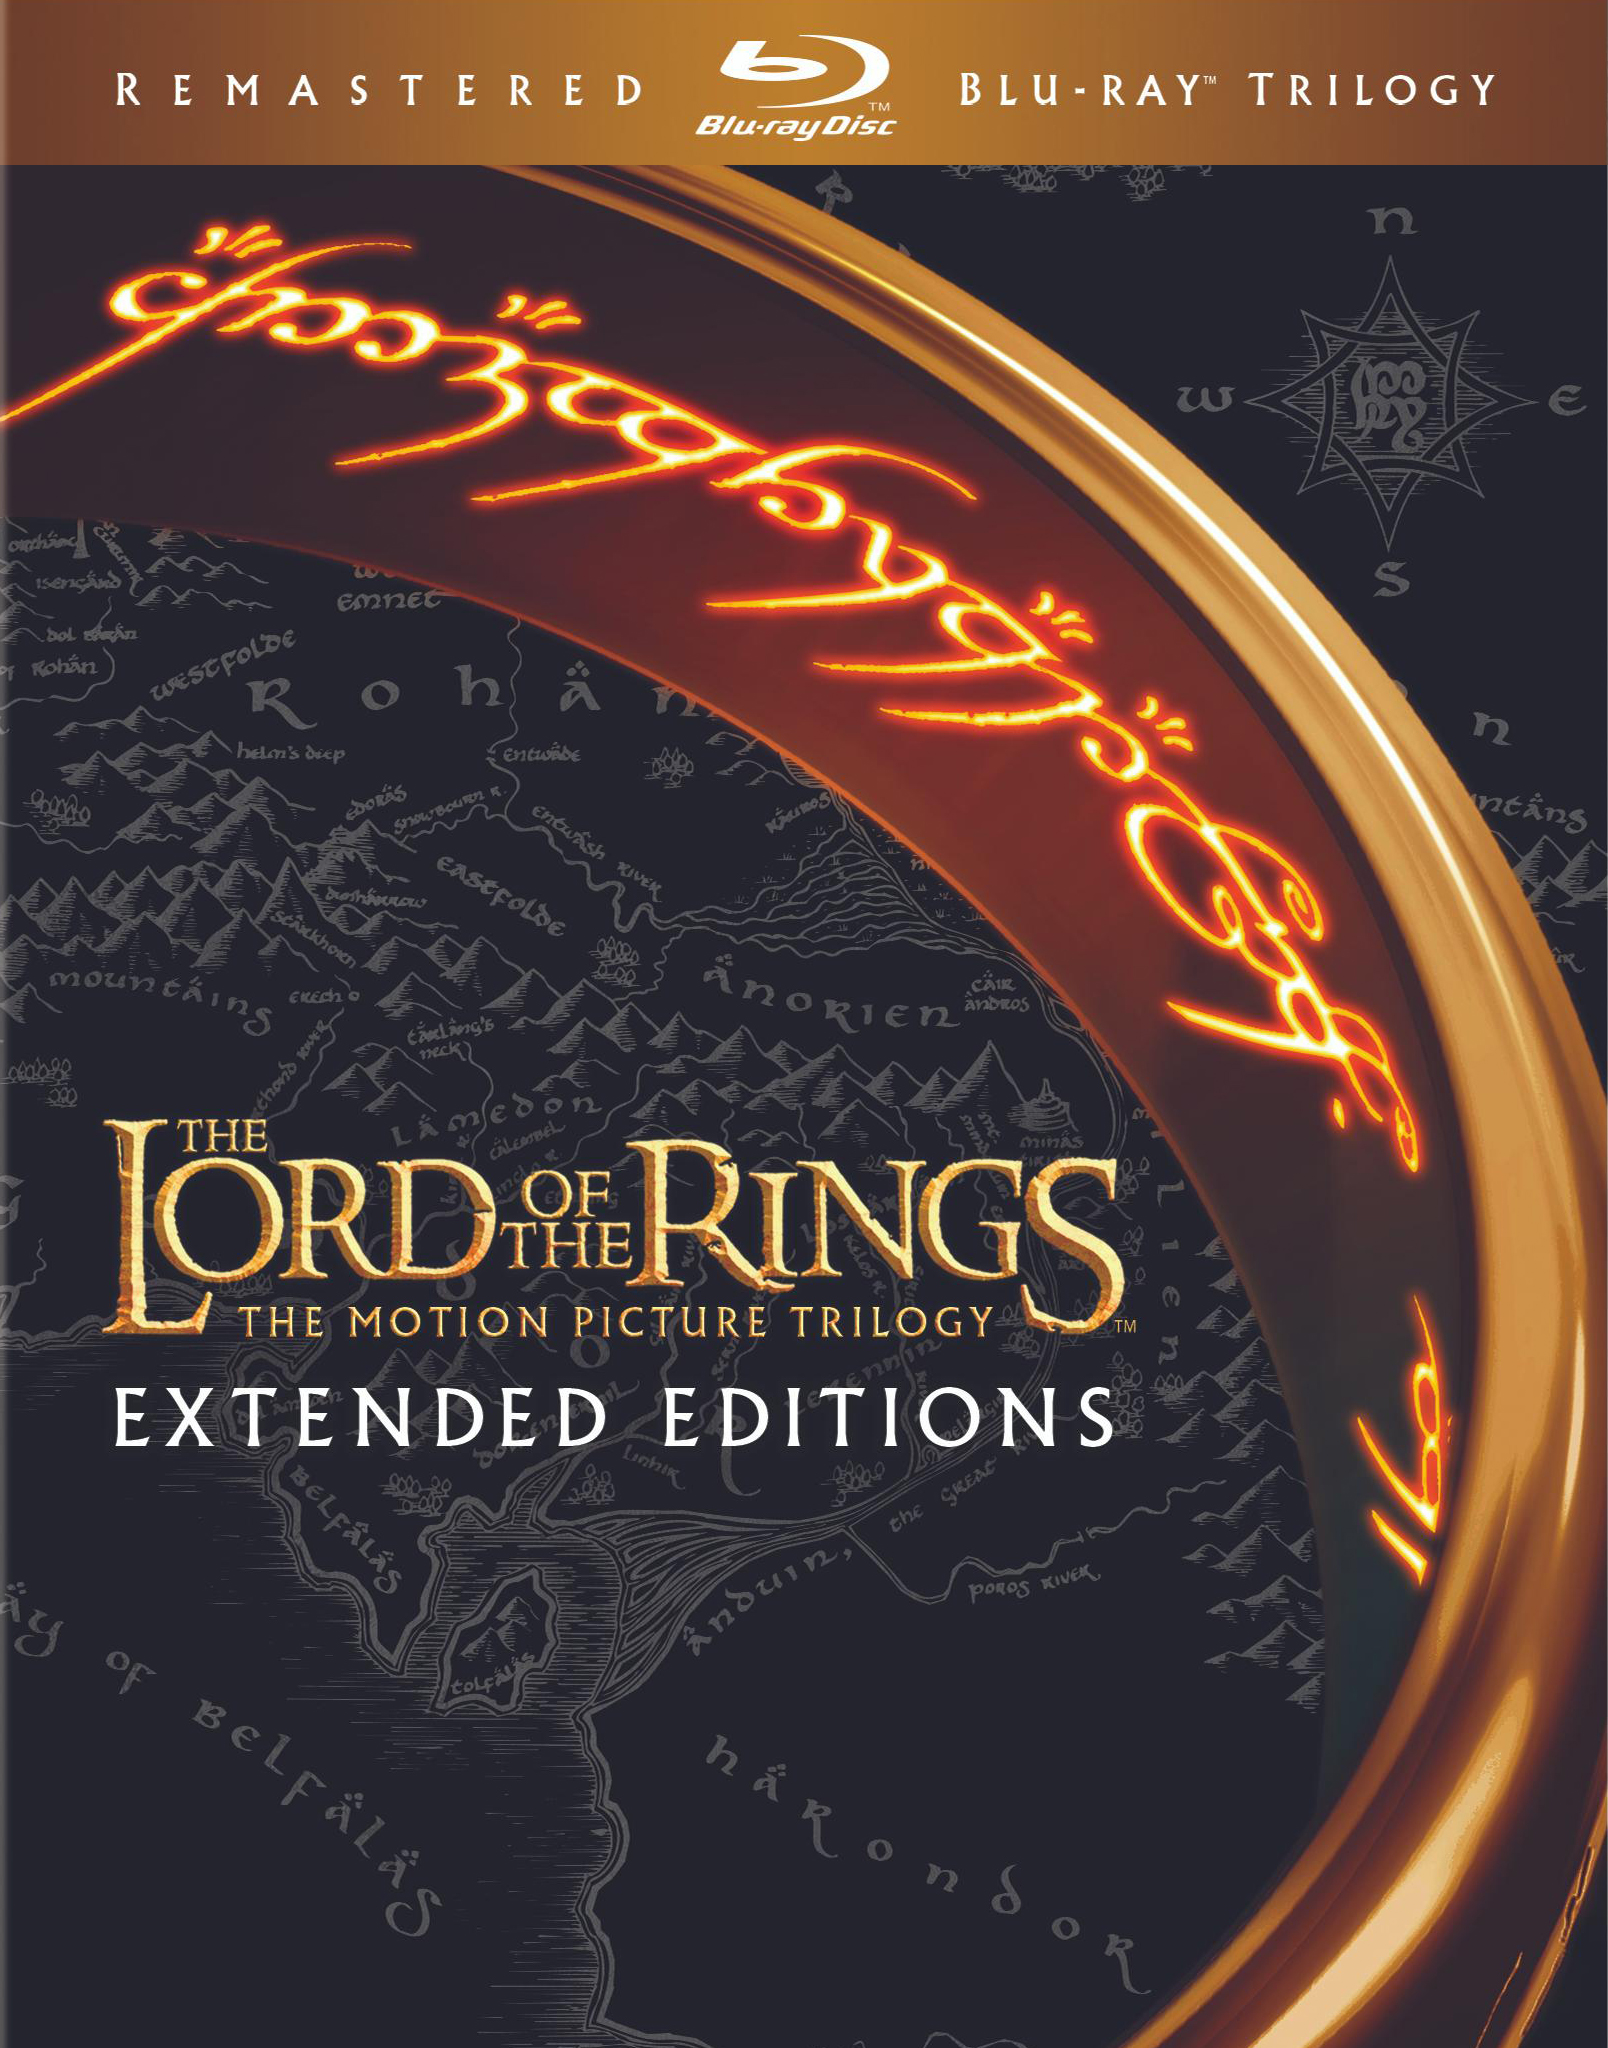 Best Buy: The Lord of the Rings: The Return of the King [Extended